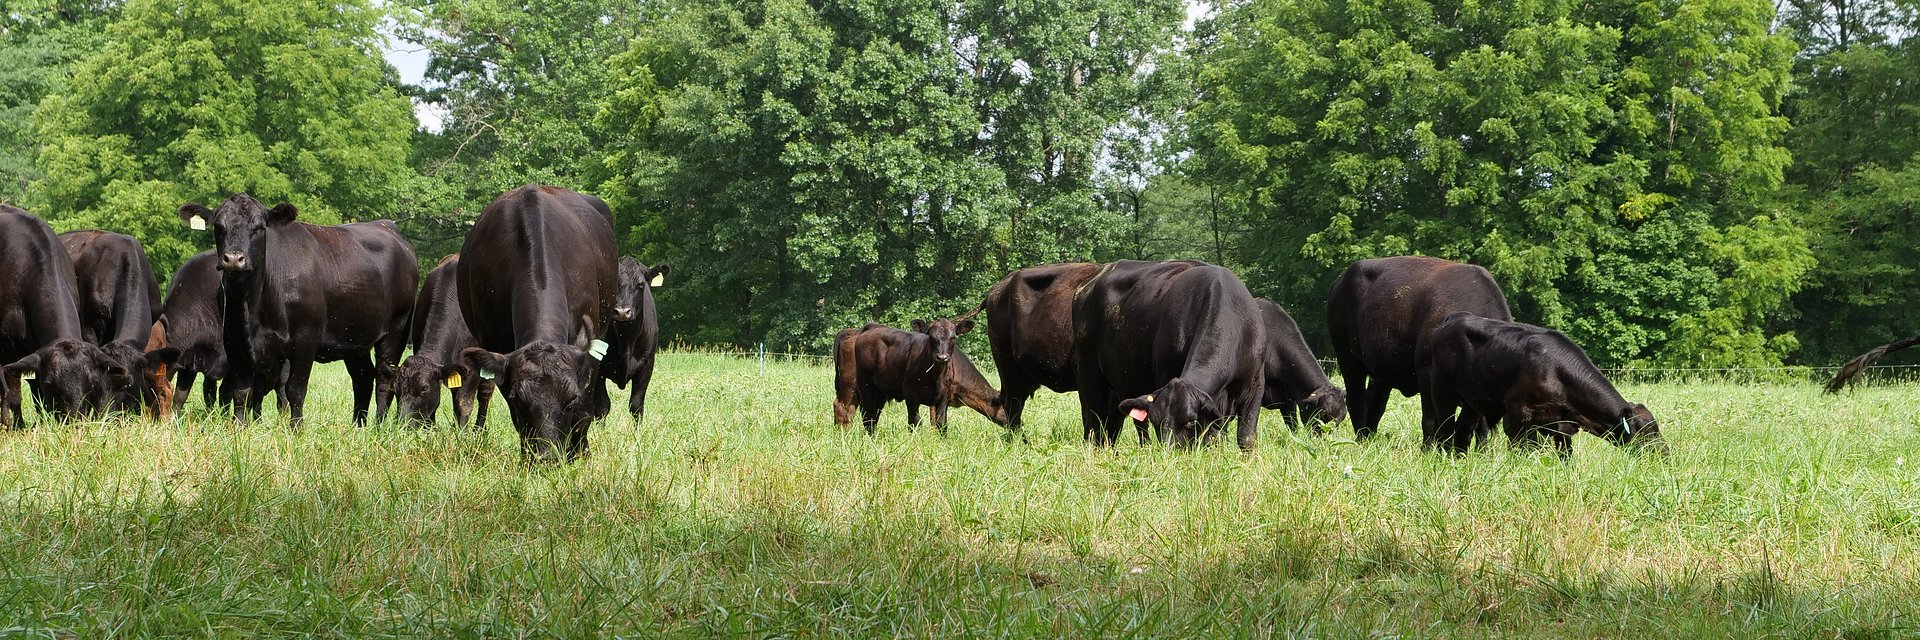 Cattle grazing in pasture with tall trees in background